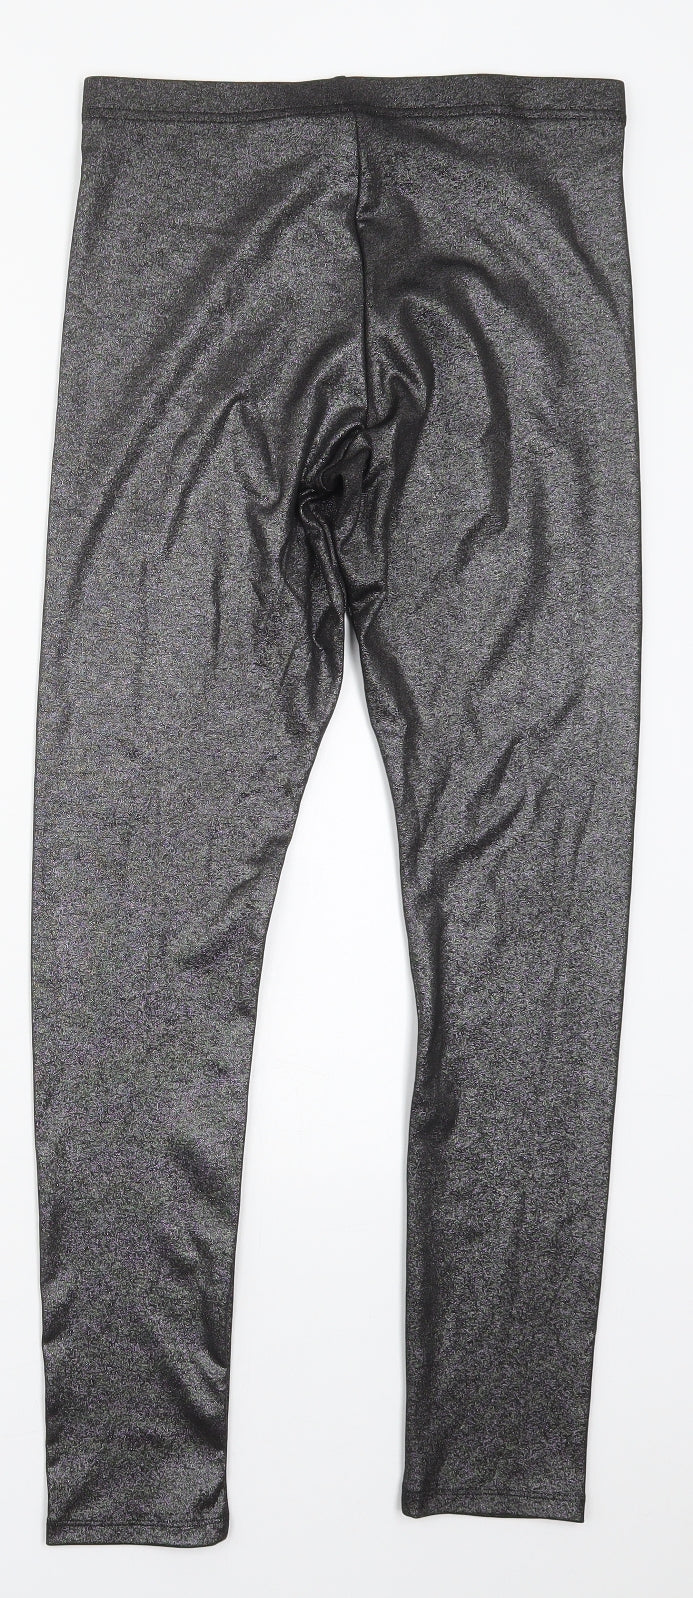 F&F Girls Grey  Polyester Carrot Trousers Size 12-13 Years  Regular